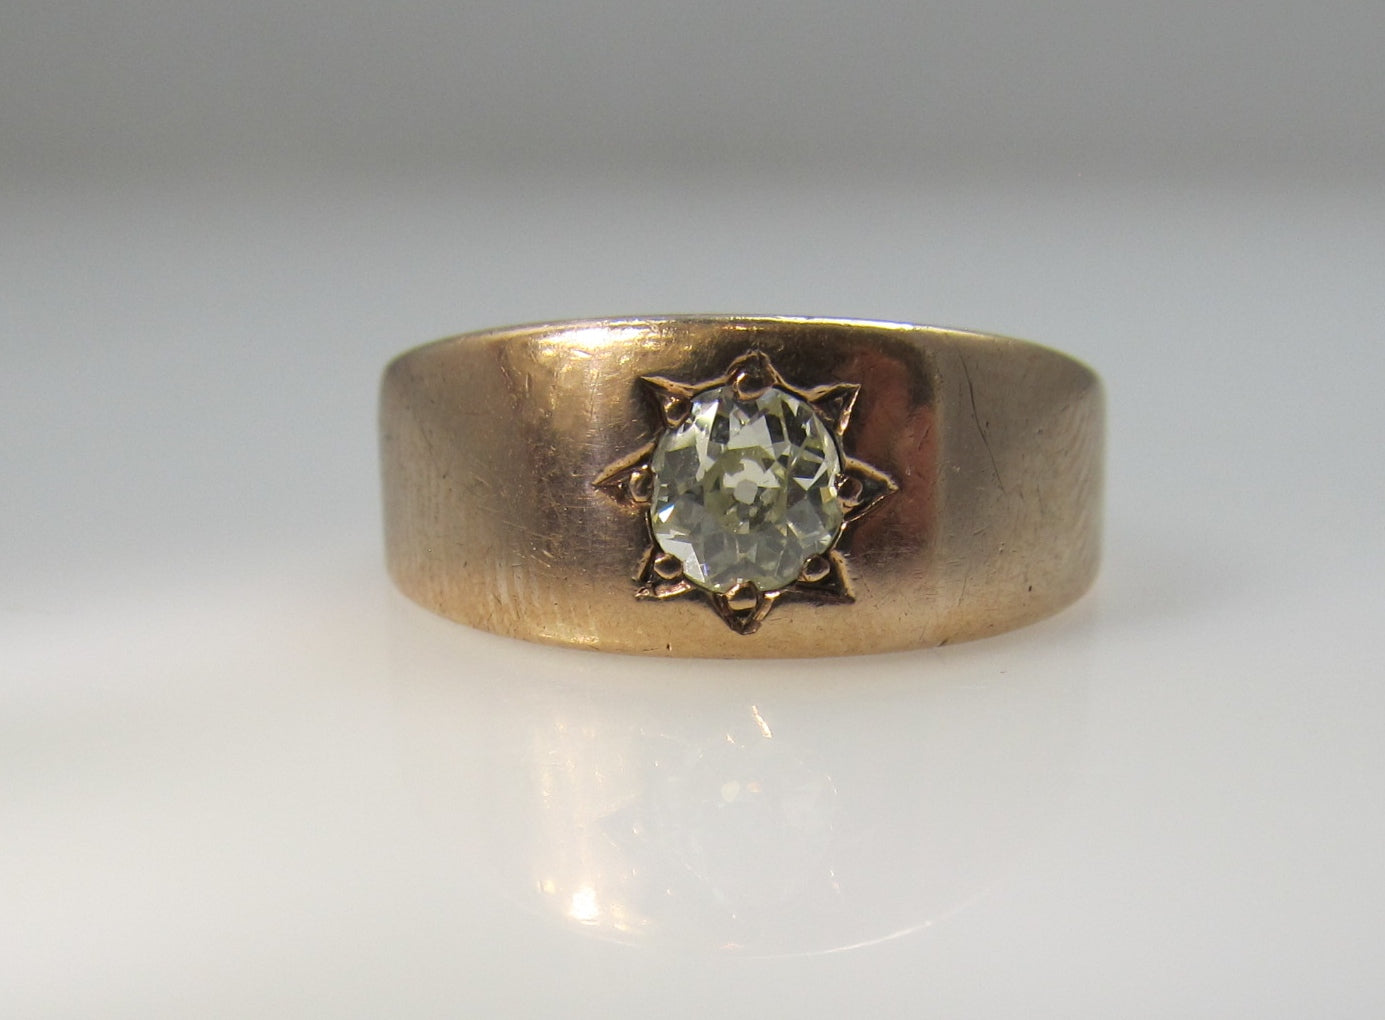 Antique 14k rose gold band with a .40ct cushion cut diamond